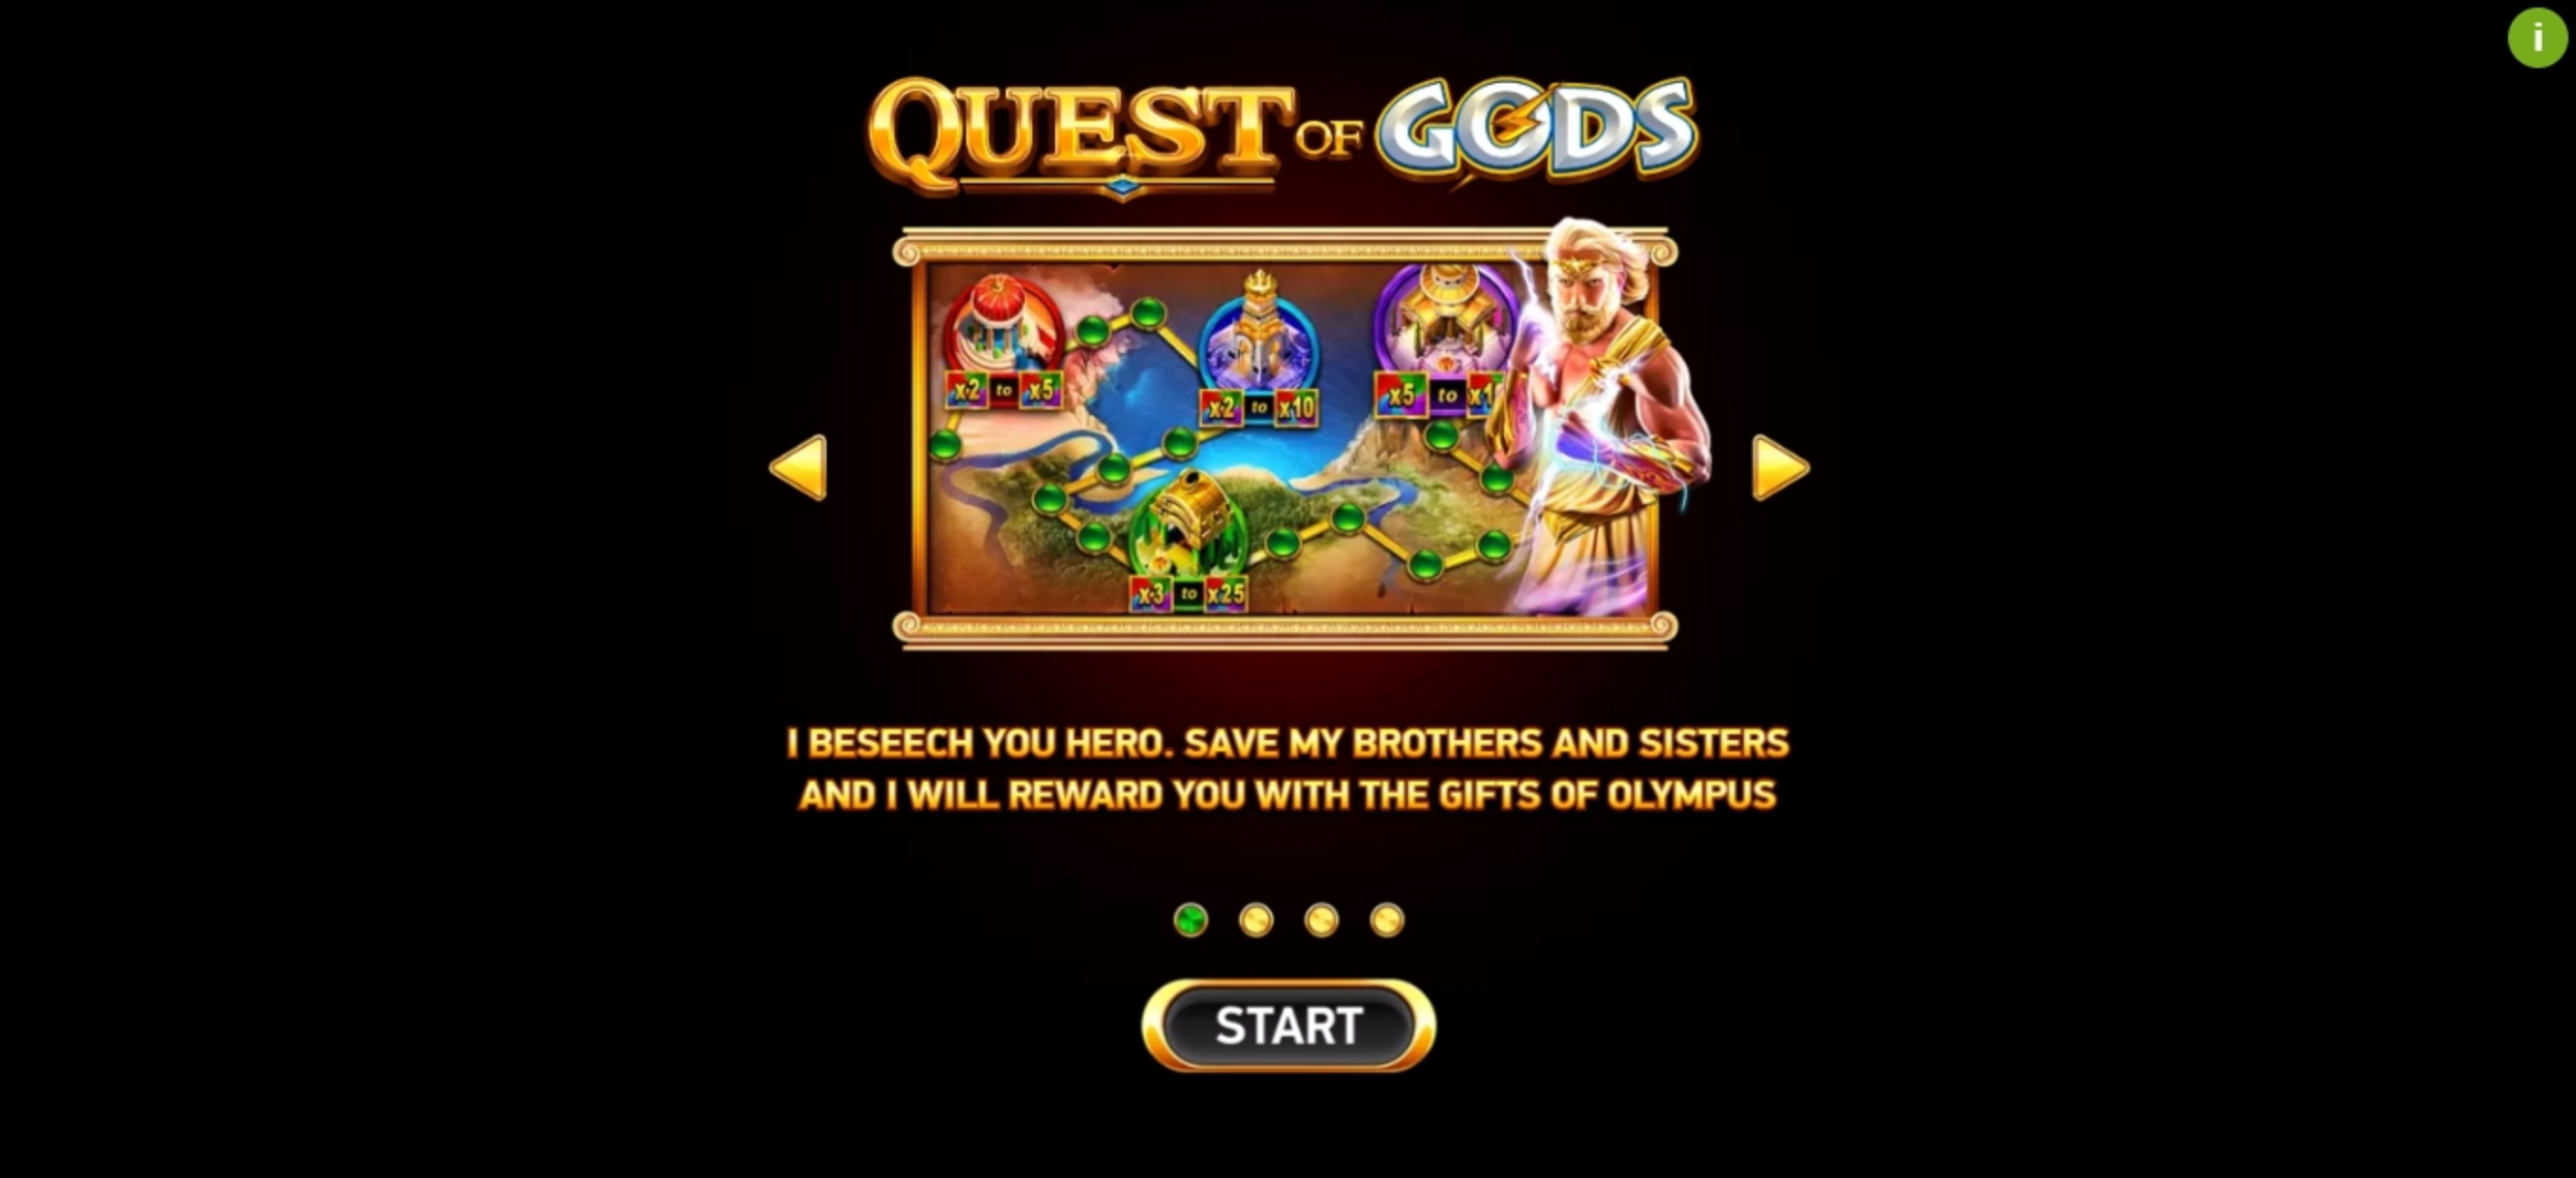 Play Quest of Gods Free Casino Slot Game by Ruby Play